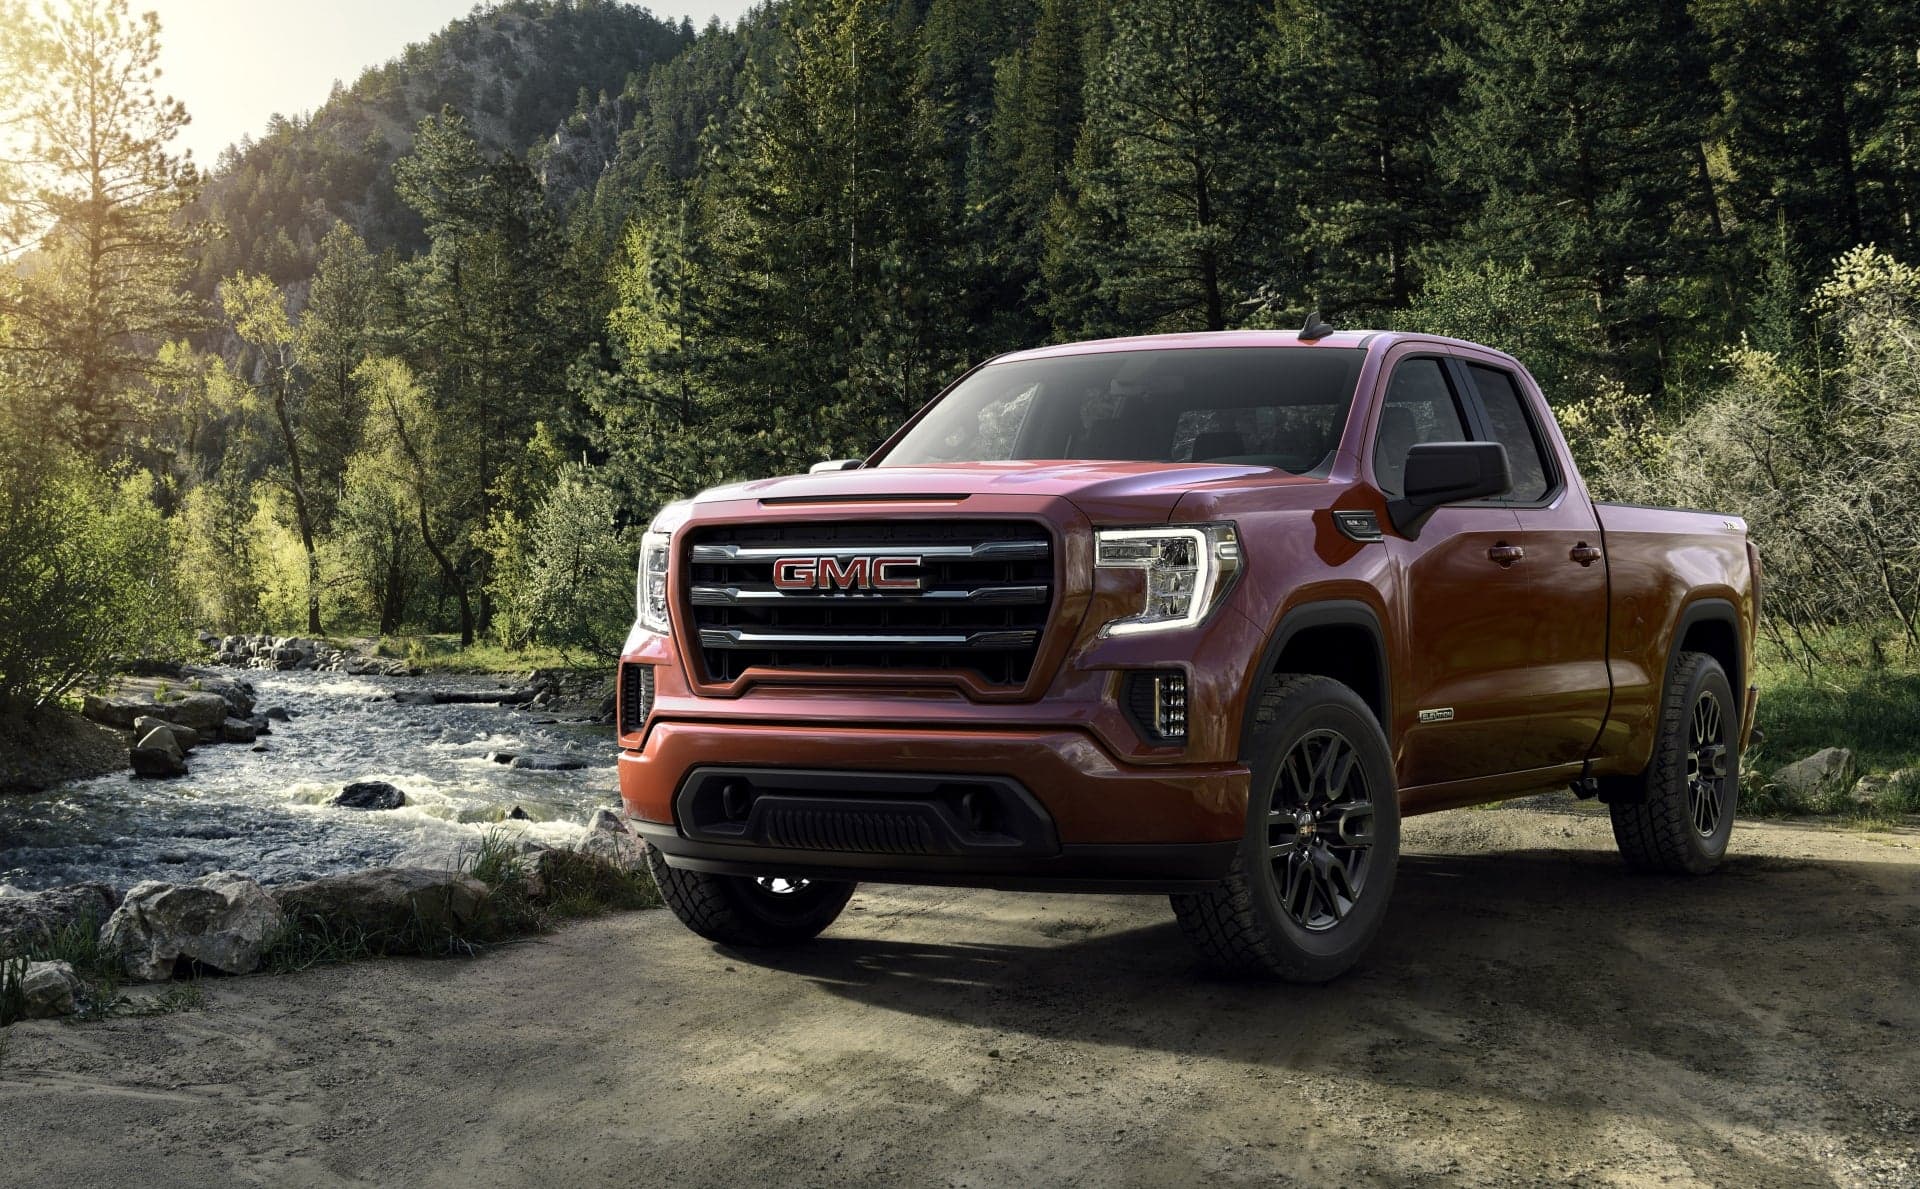 Striking New 2019 GMC Sierra Elevation Spices Up the GMC Lineup